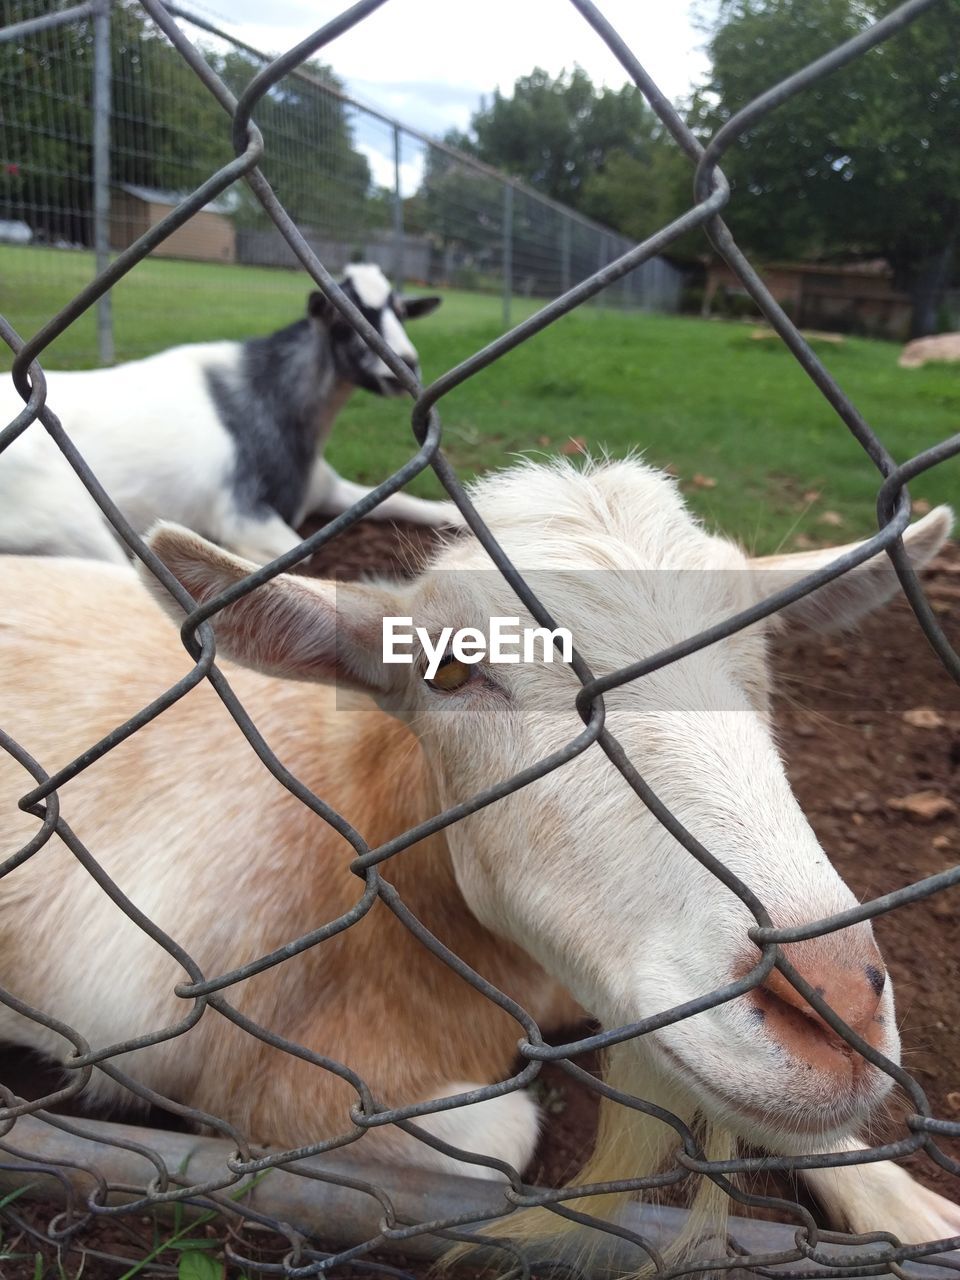 Portrait of goat sitting behind chainlink fence on field